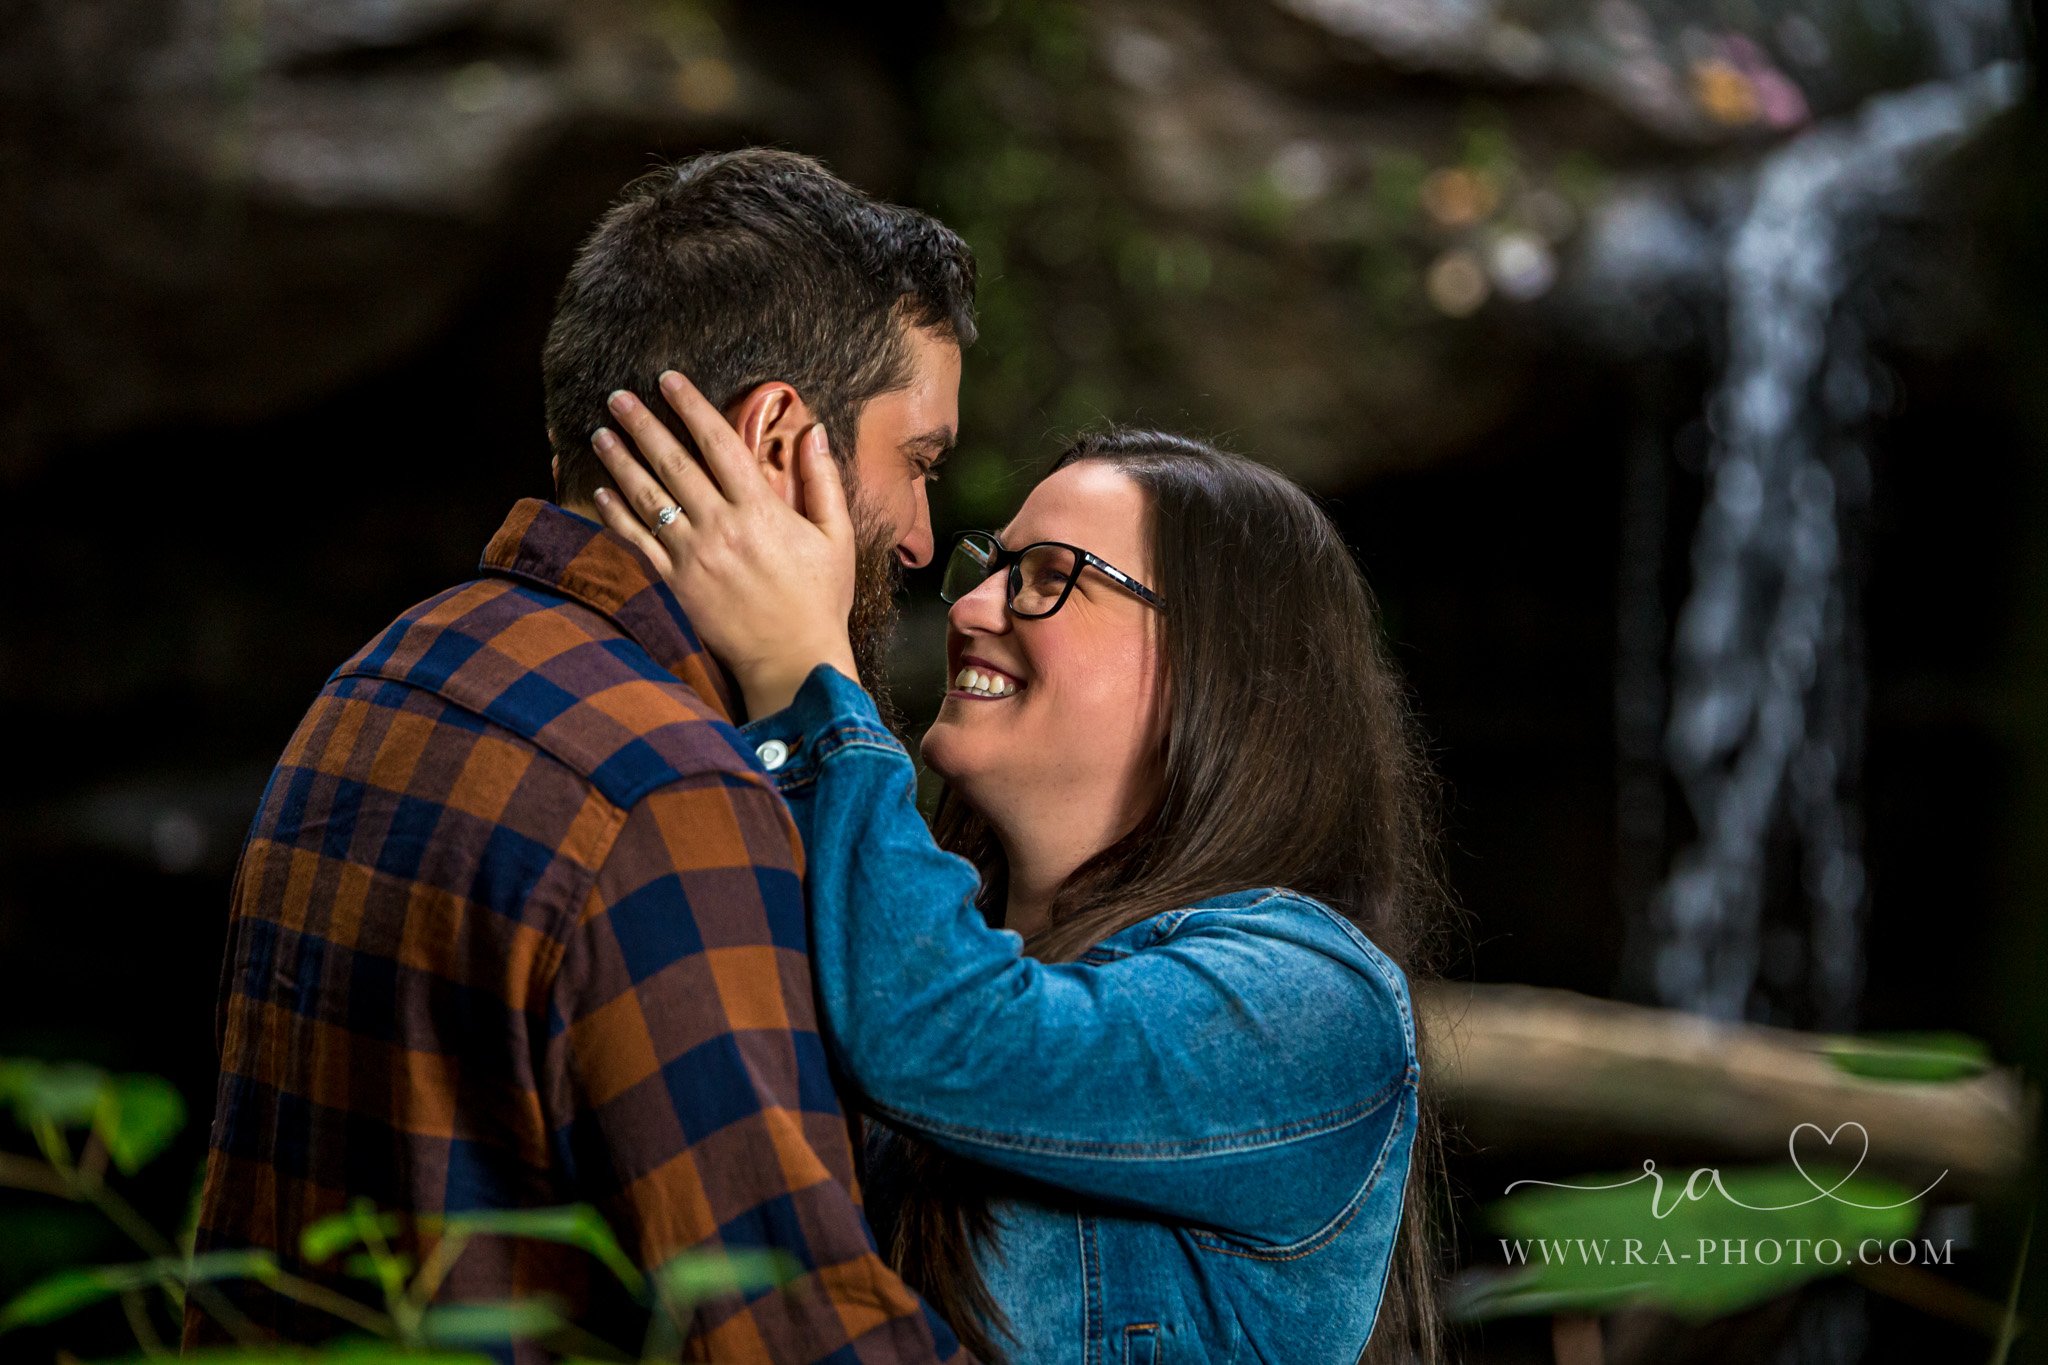 023-MGS-FALLS-CREEK-PA-ENGAGEMENT-PICTURES.jpg